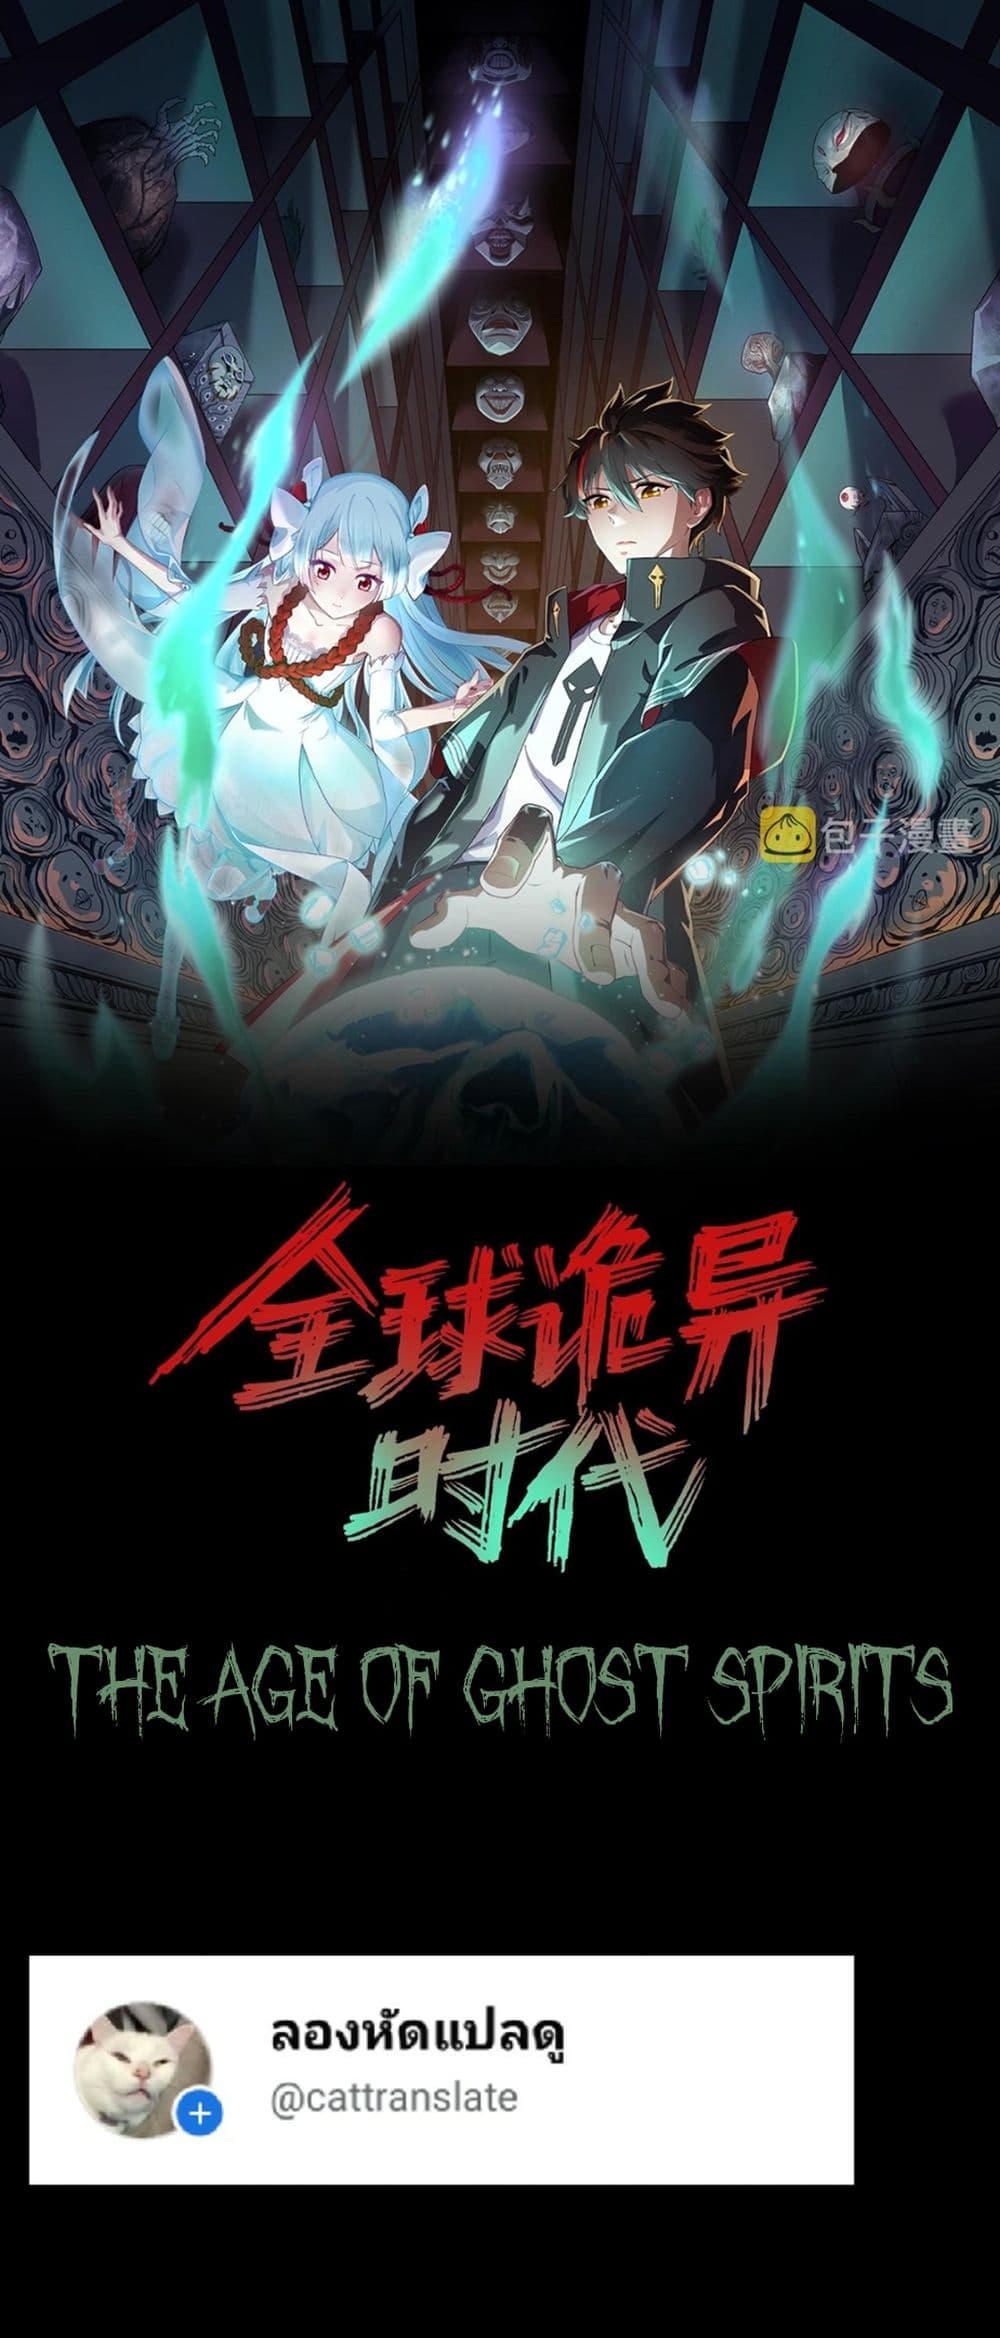 The Age of Ghost Spirits à¸à¸­à¸à¸à¸µà¹ 1 (1)